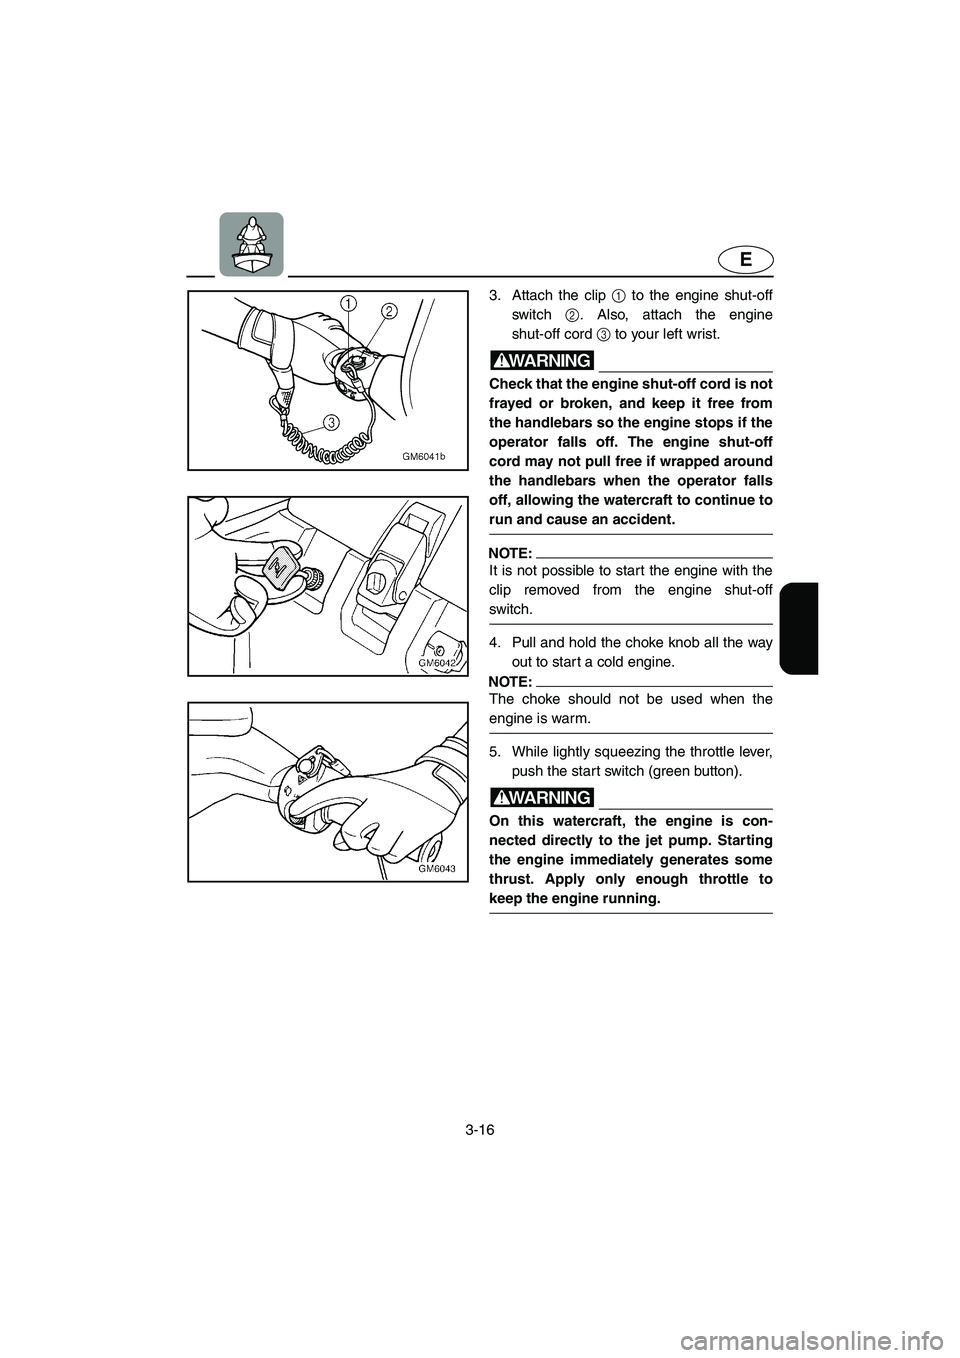 YAMAHA SUPERJET 2006  Owners Manual 3-16
E
3. Attach the clip 1 to the engine shut-off
switch 2. Also, attach the engine
shut-off cord 3 to your left wrist. 
WARNING@ Check that the engine shut-off cord is not
frayed or broken, and keep